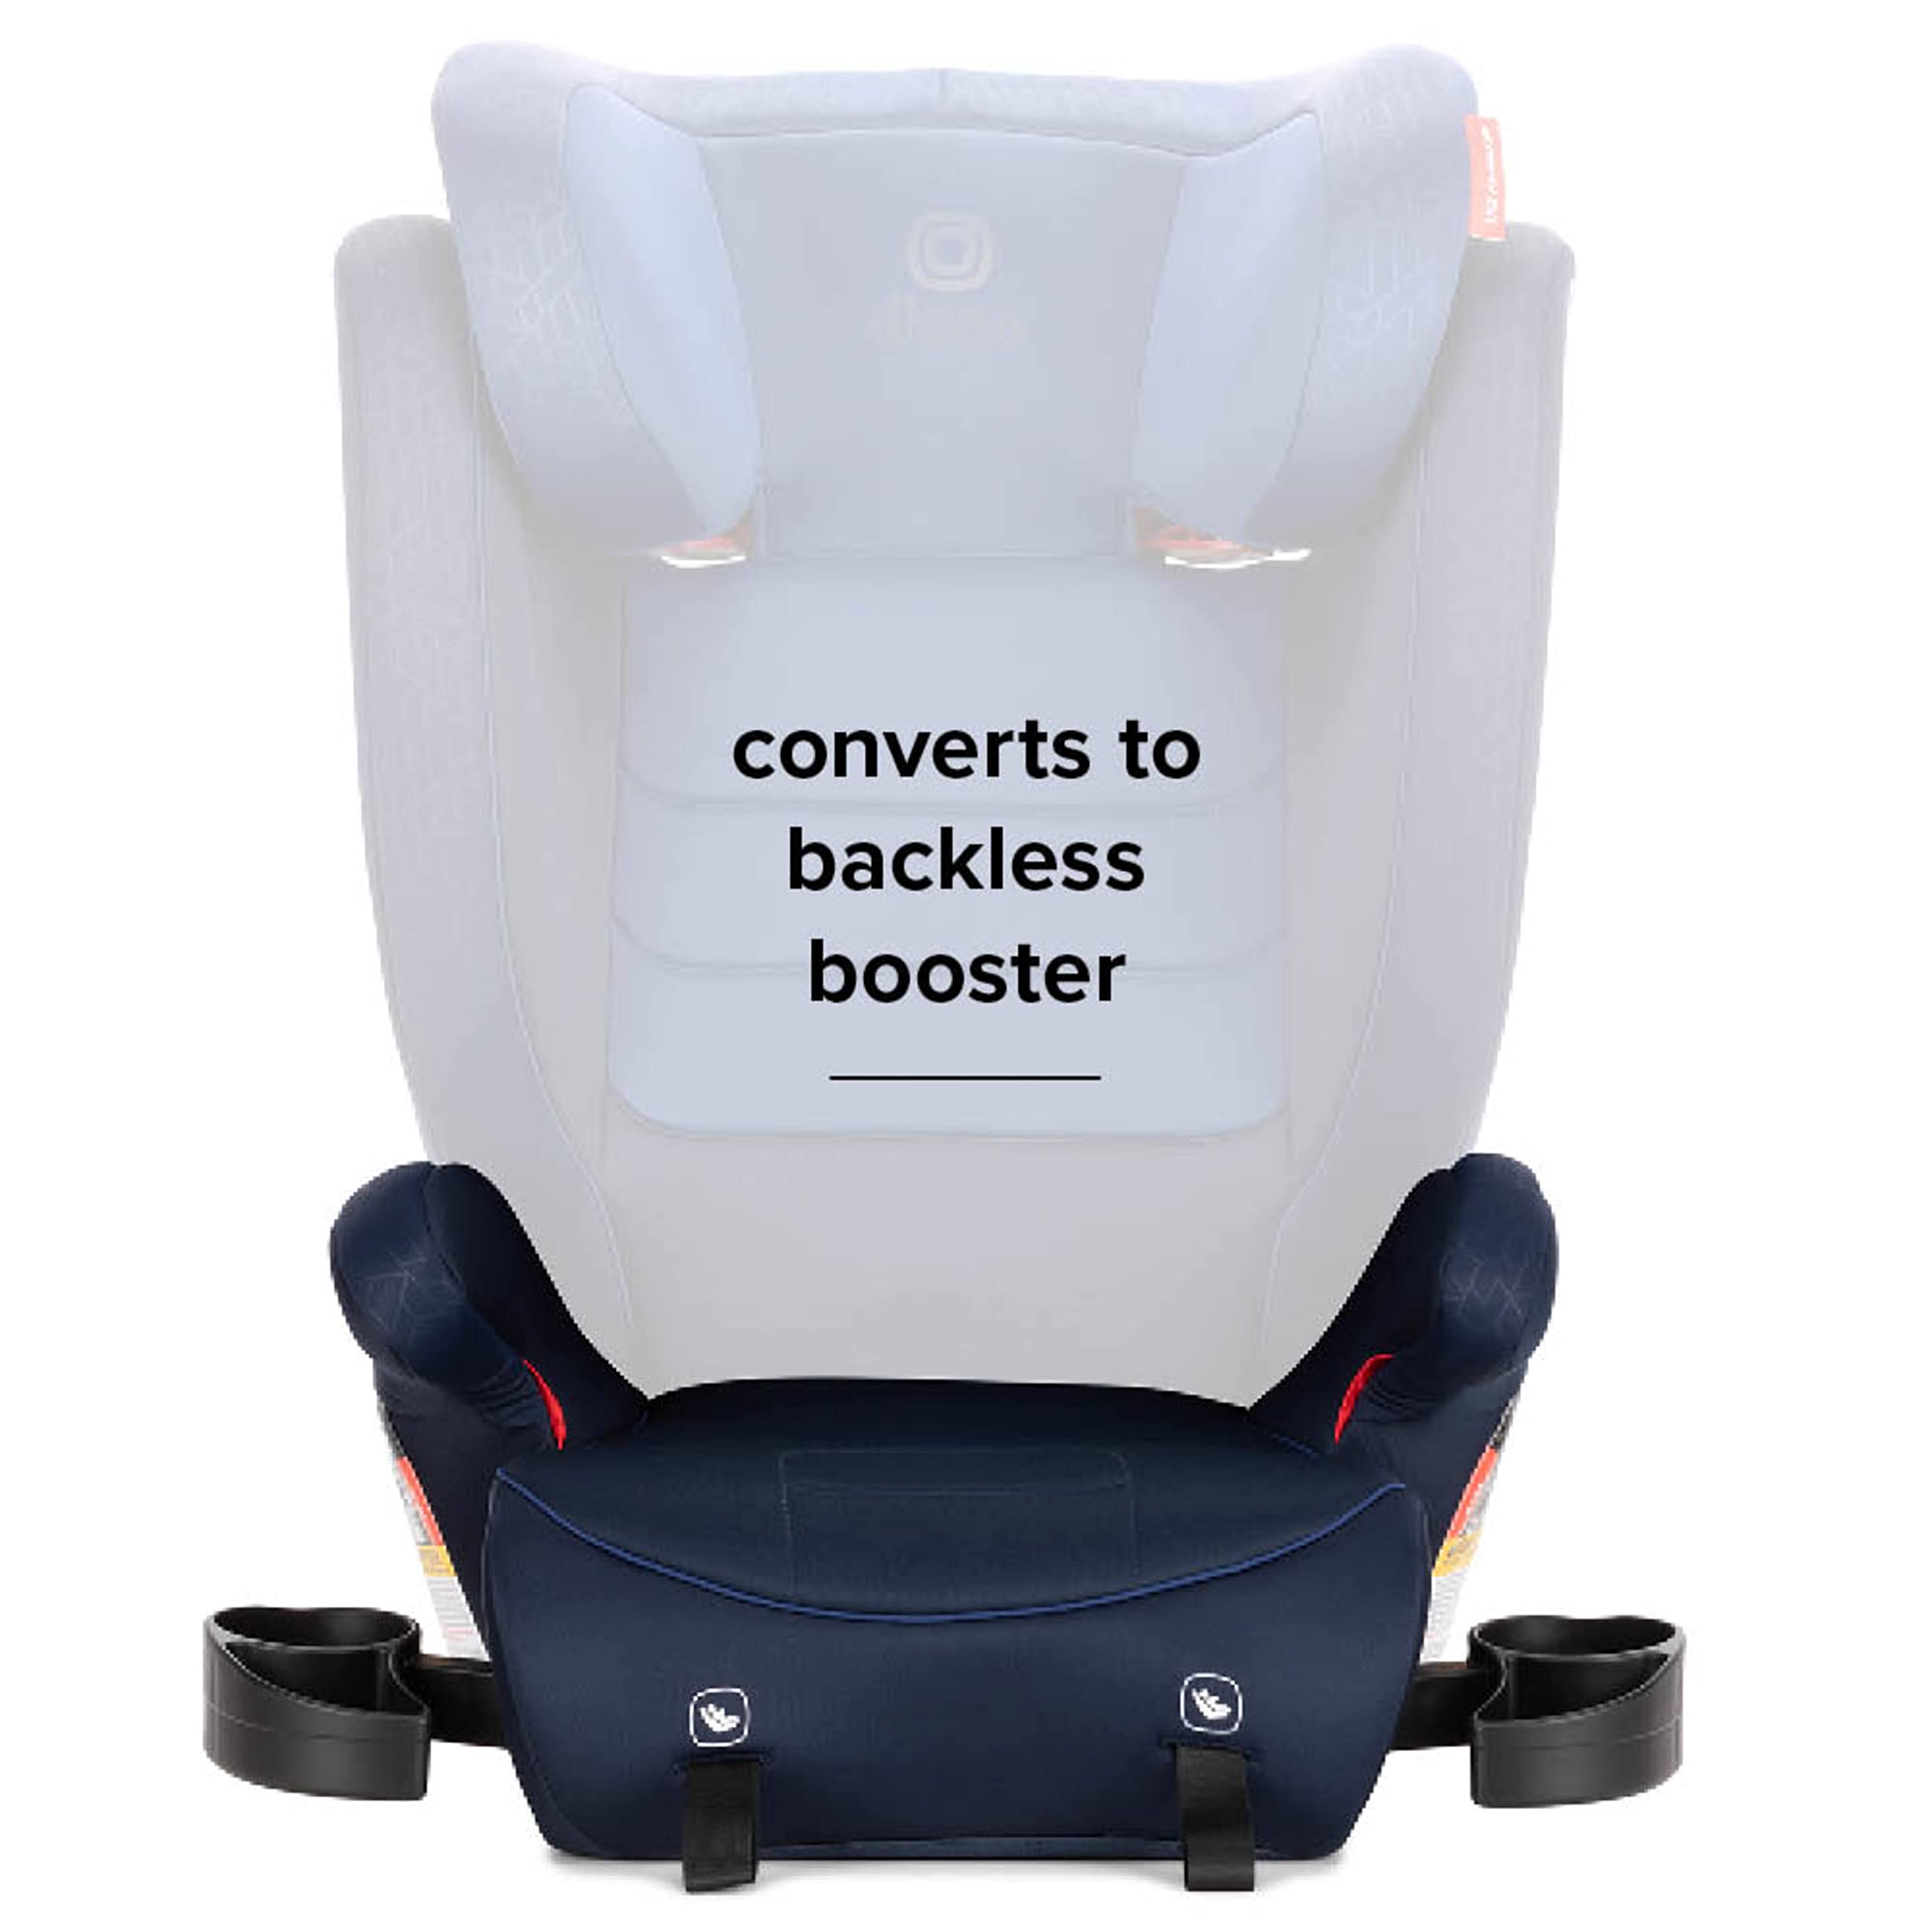 Diono Monterey 2XT Latch 2 in 1 High Back Booster Car Seat with Expandable Height & Width, Side Impact Protection, 8 Years 1 Booster, Blue